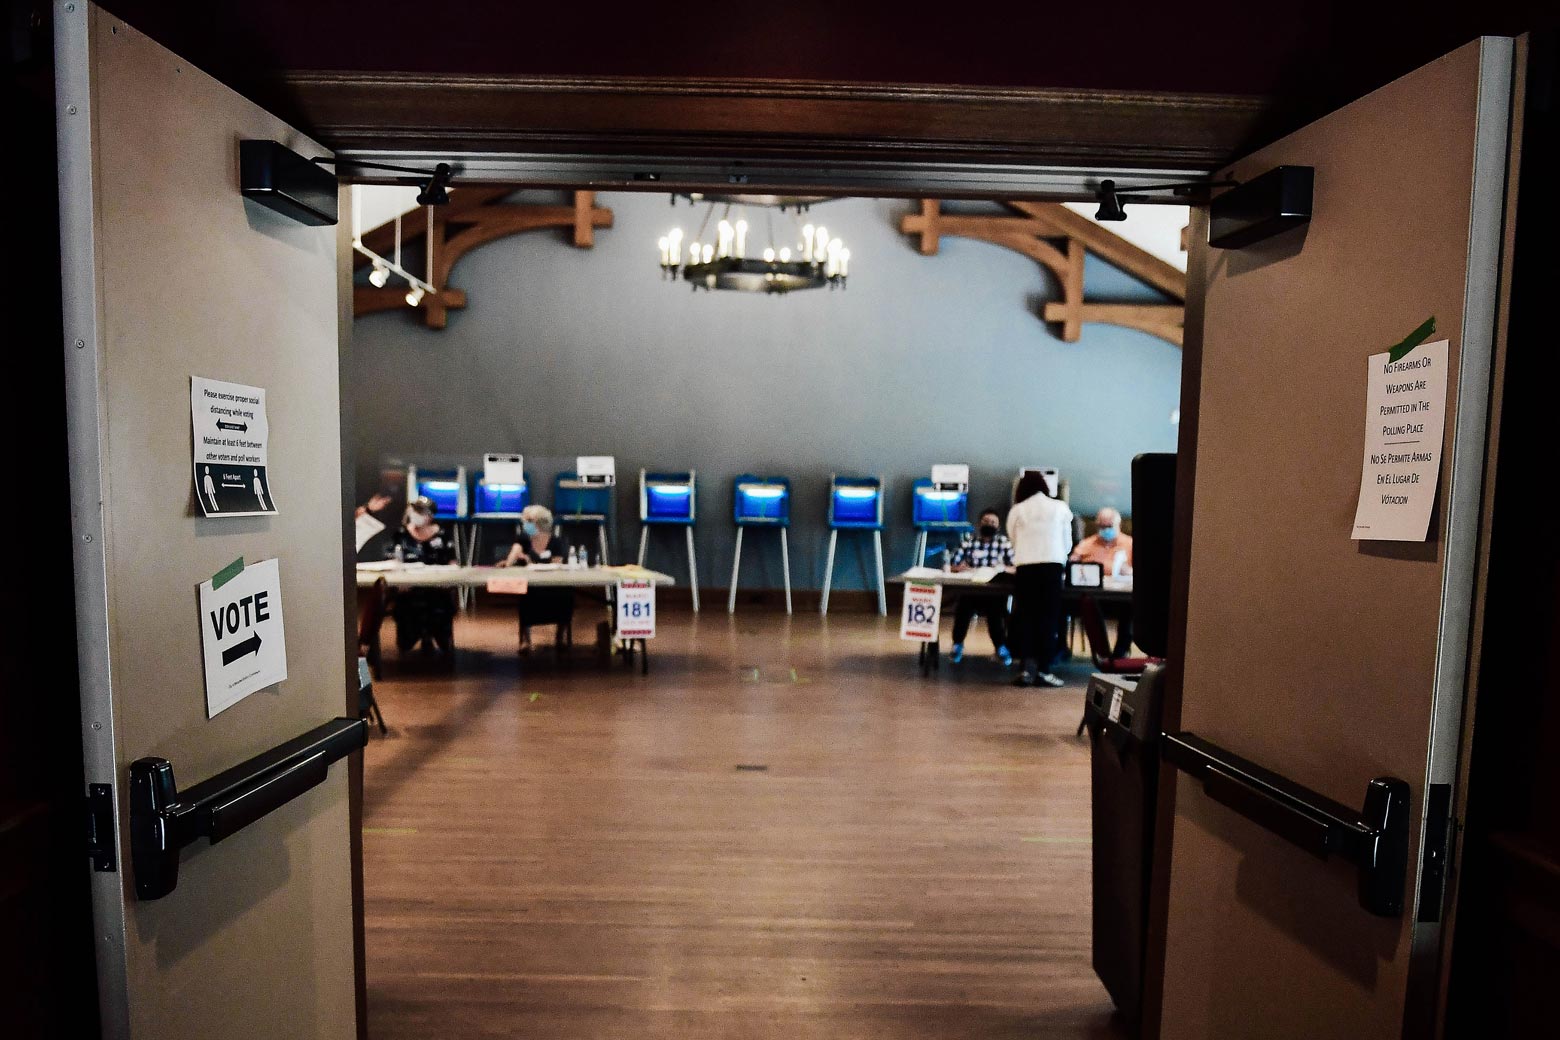 Doors open to a polling site with tables and booths